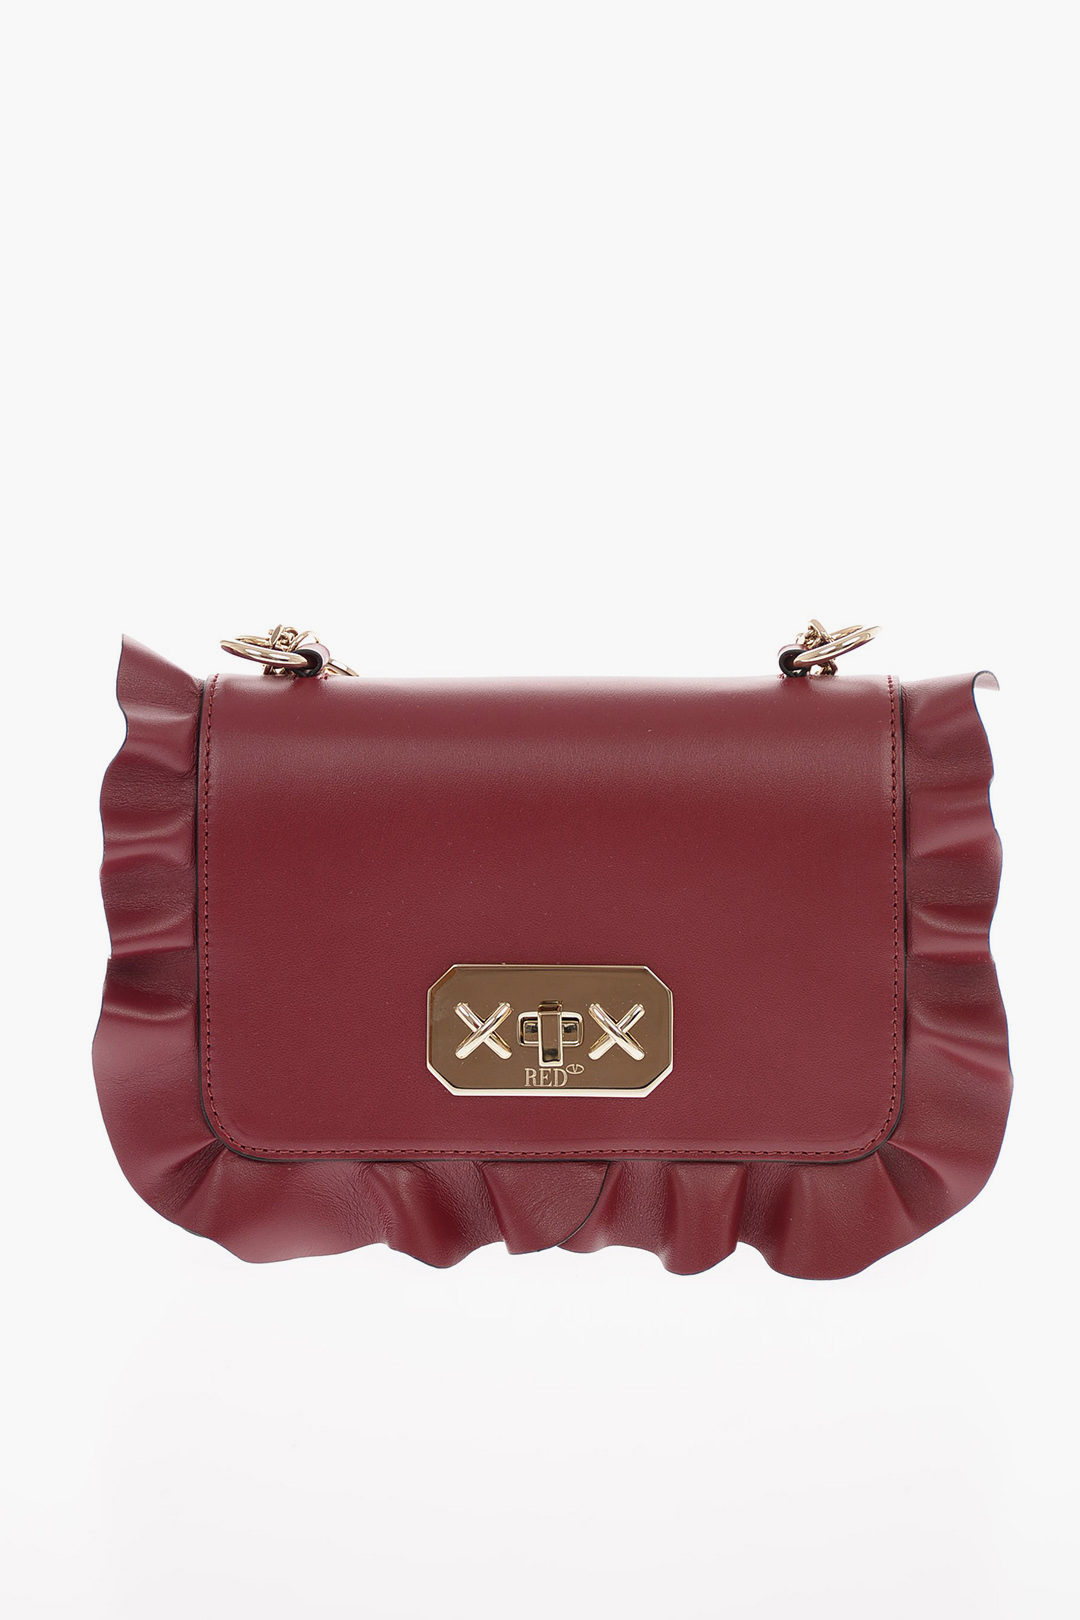 RED Valentino Metallic Gold Leather Rock Ruffles Shoulder Bag RED Valentino